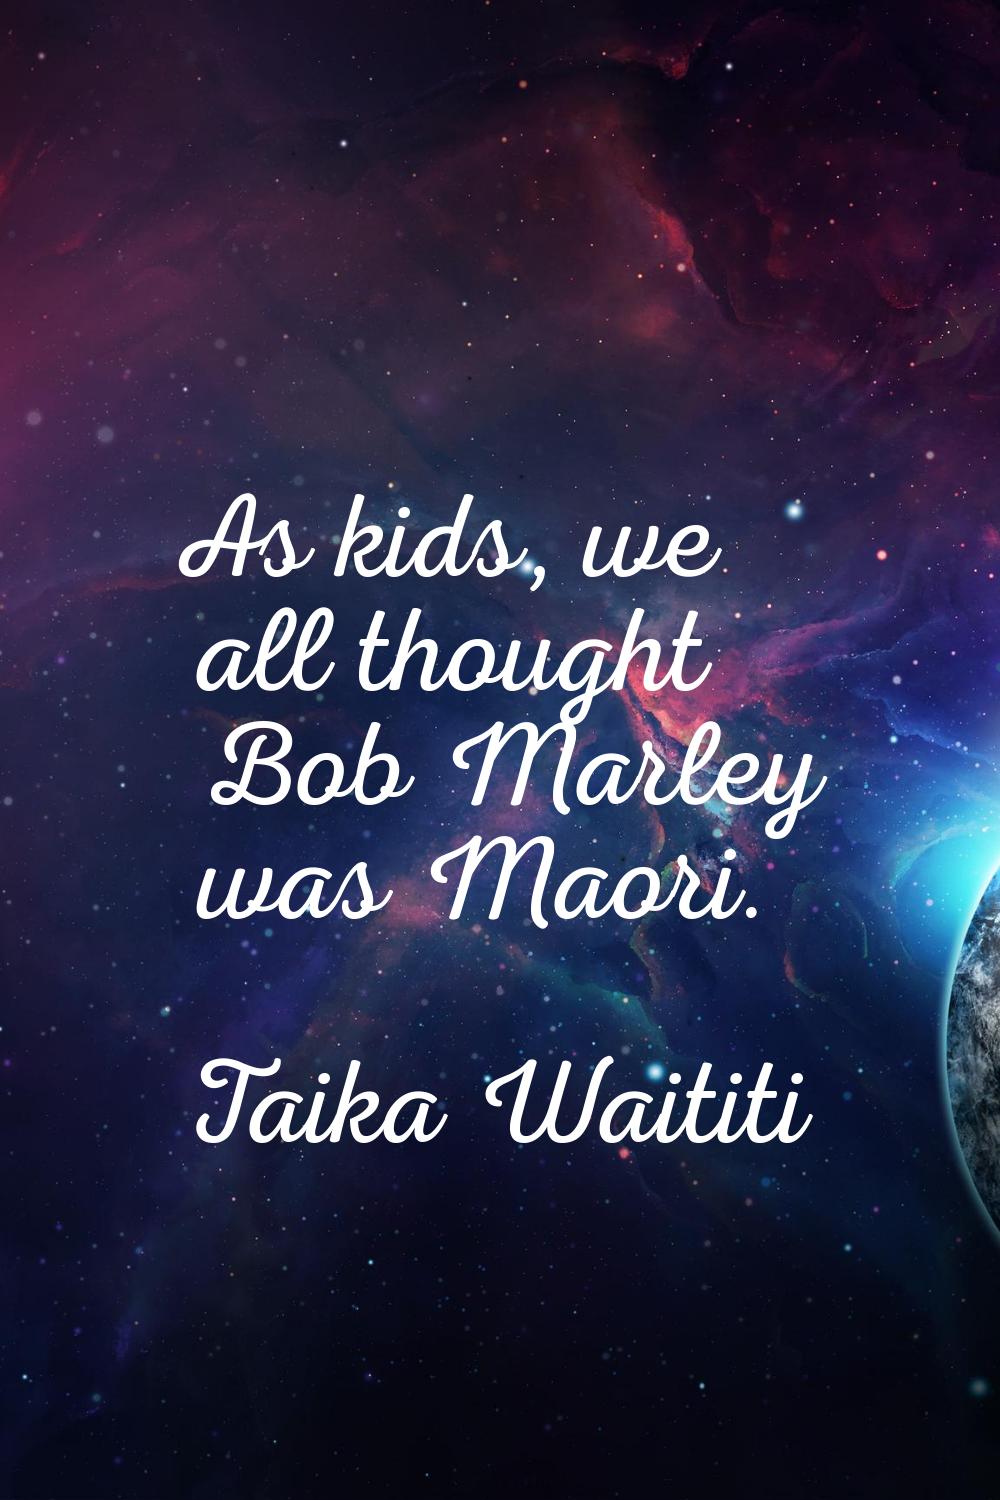 As kids, we all thought Bob Marley was Maori.